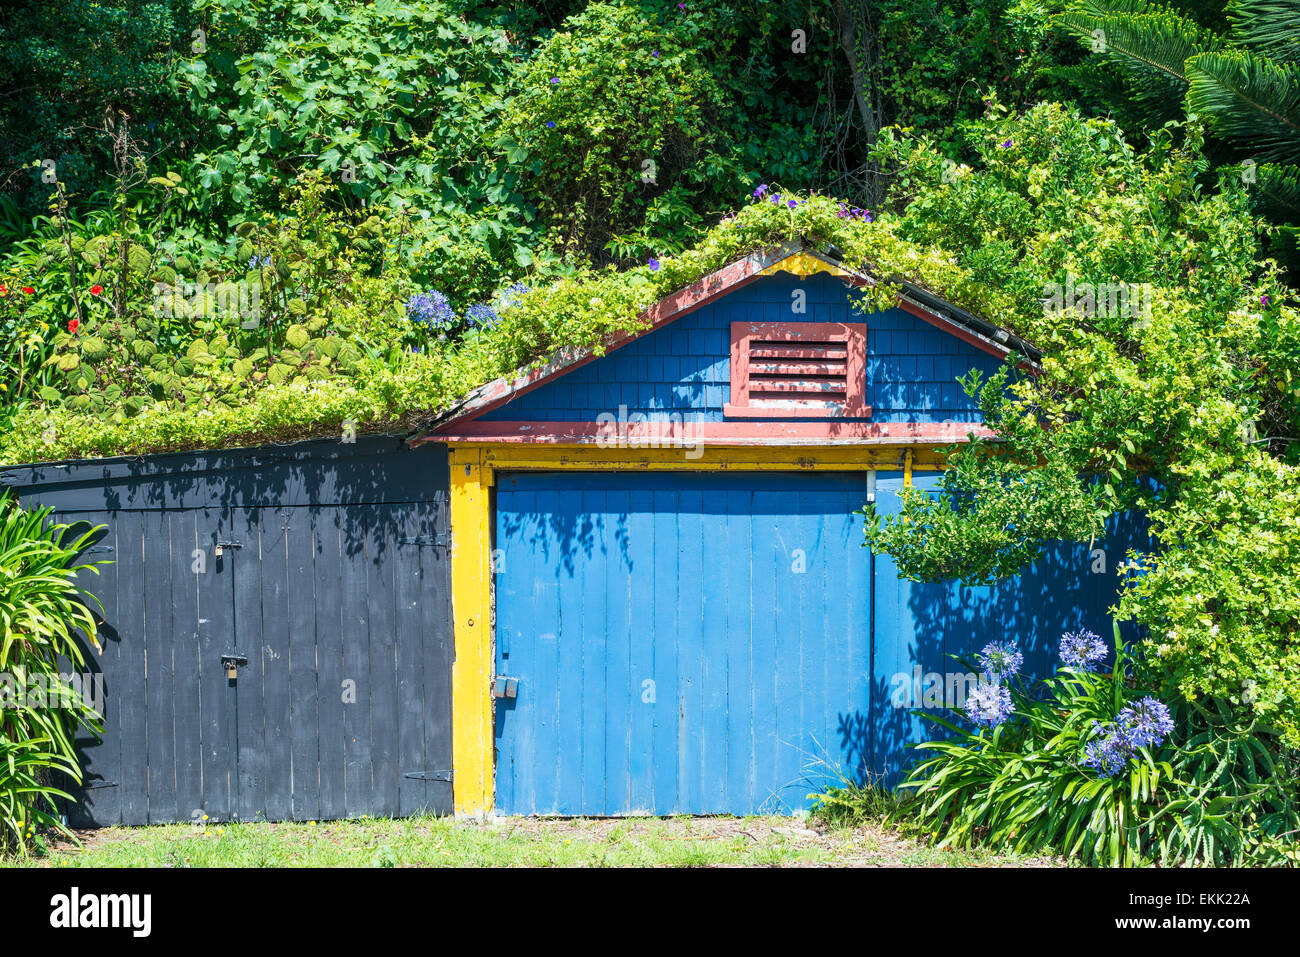 A old blue wooden barn surrounded by lush green vegetation on the north shore of Coromandel Peninsula, New Zealand Stock Photo